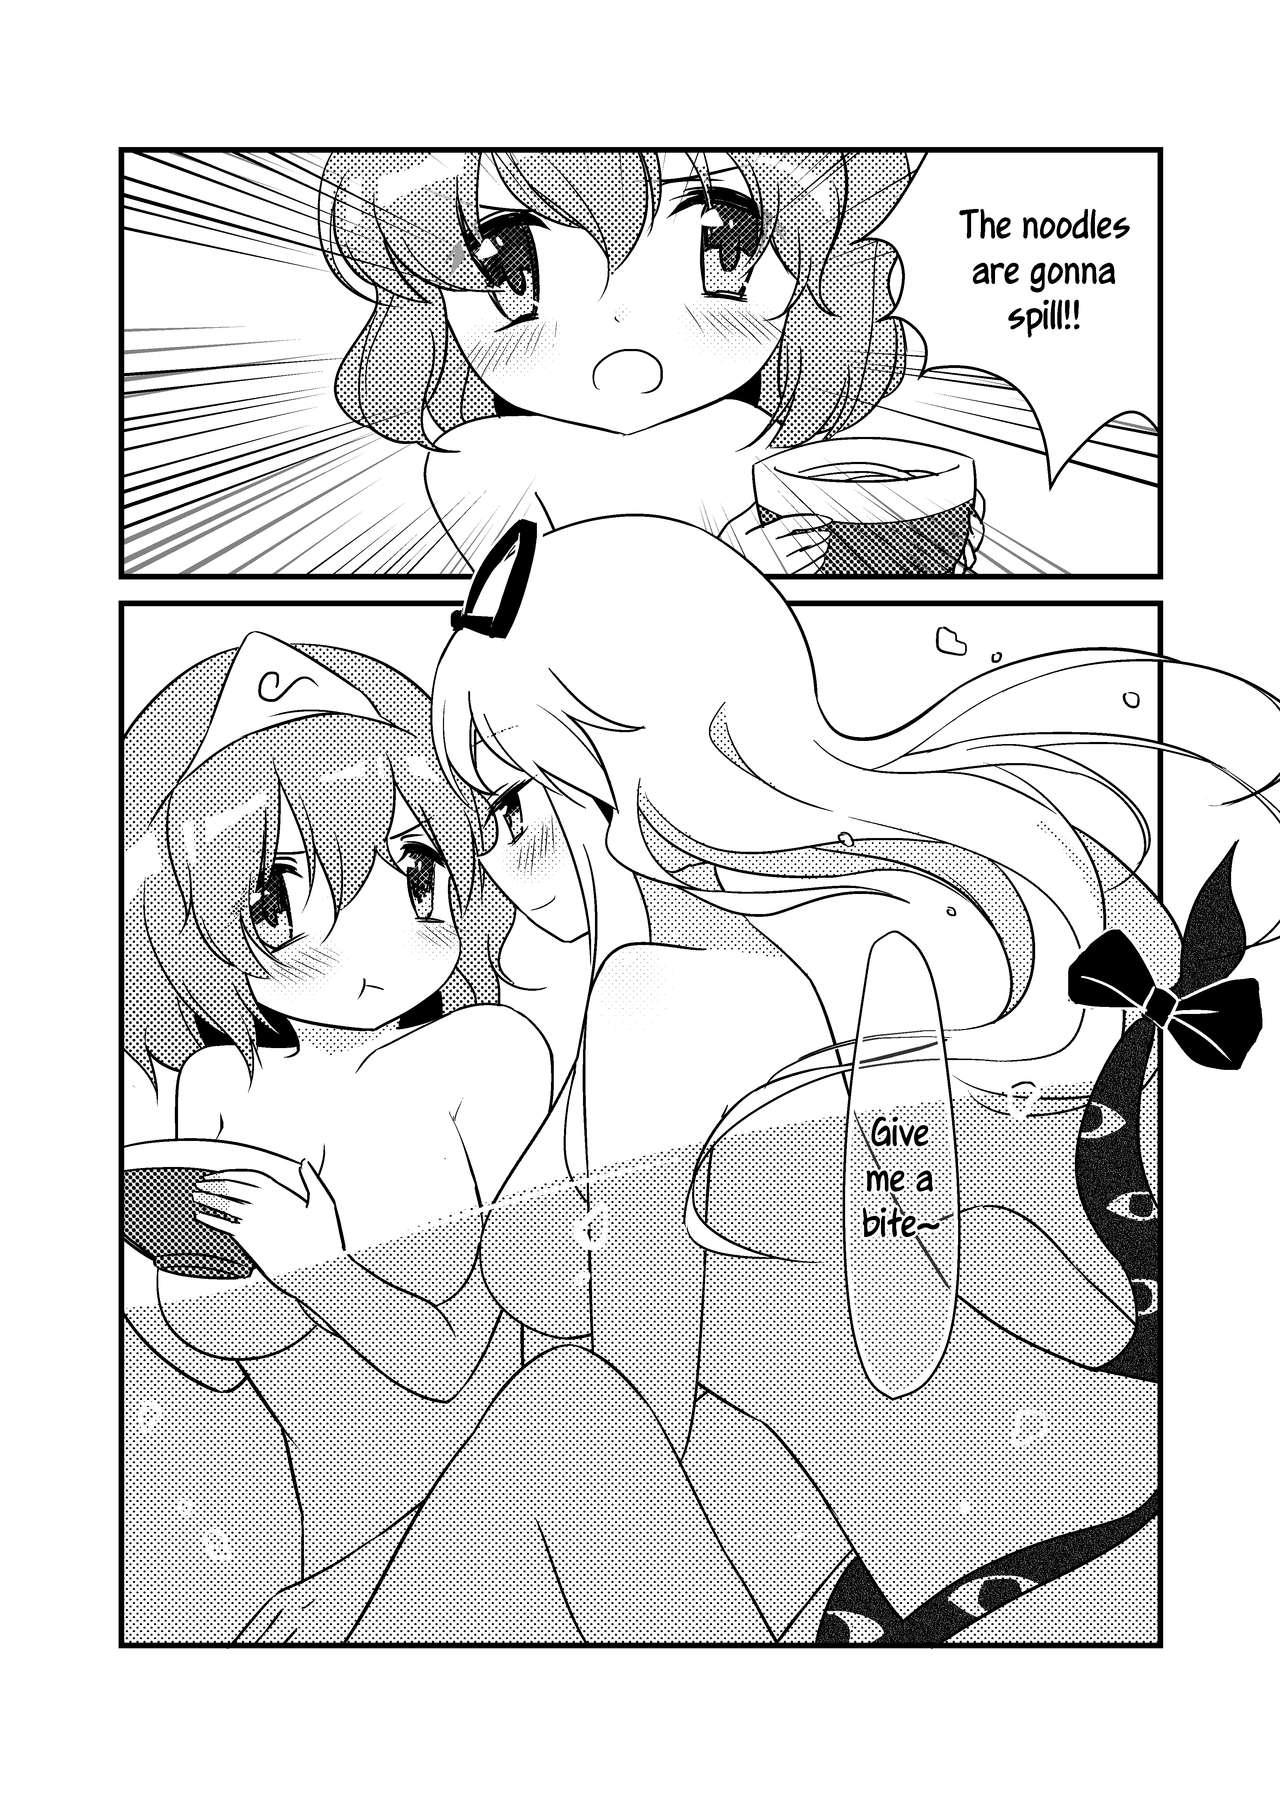 Sharing ????一起泡温泉吧！ | ????Let's Soak in the Hot Spring! - Touhou project Gay Kissing - Page 6